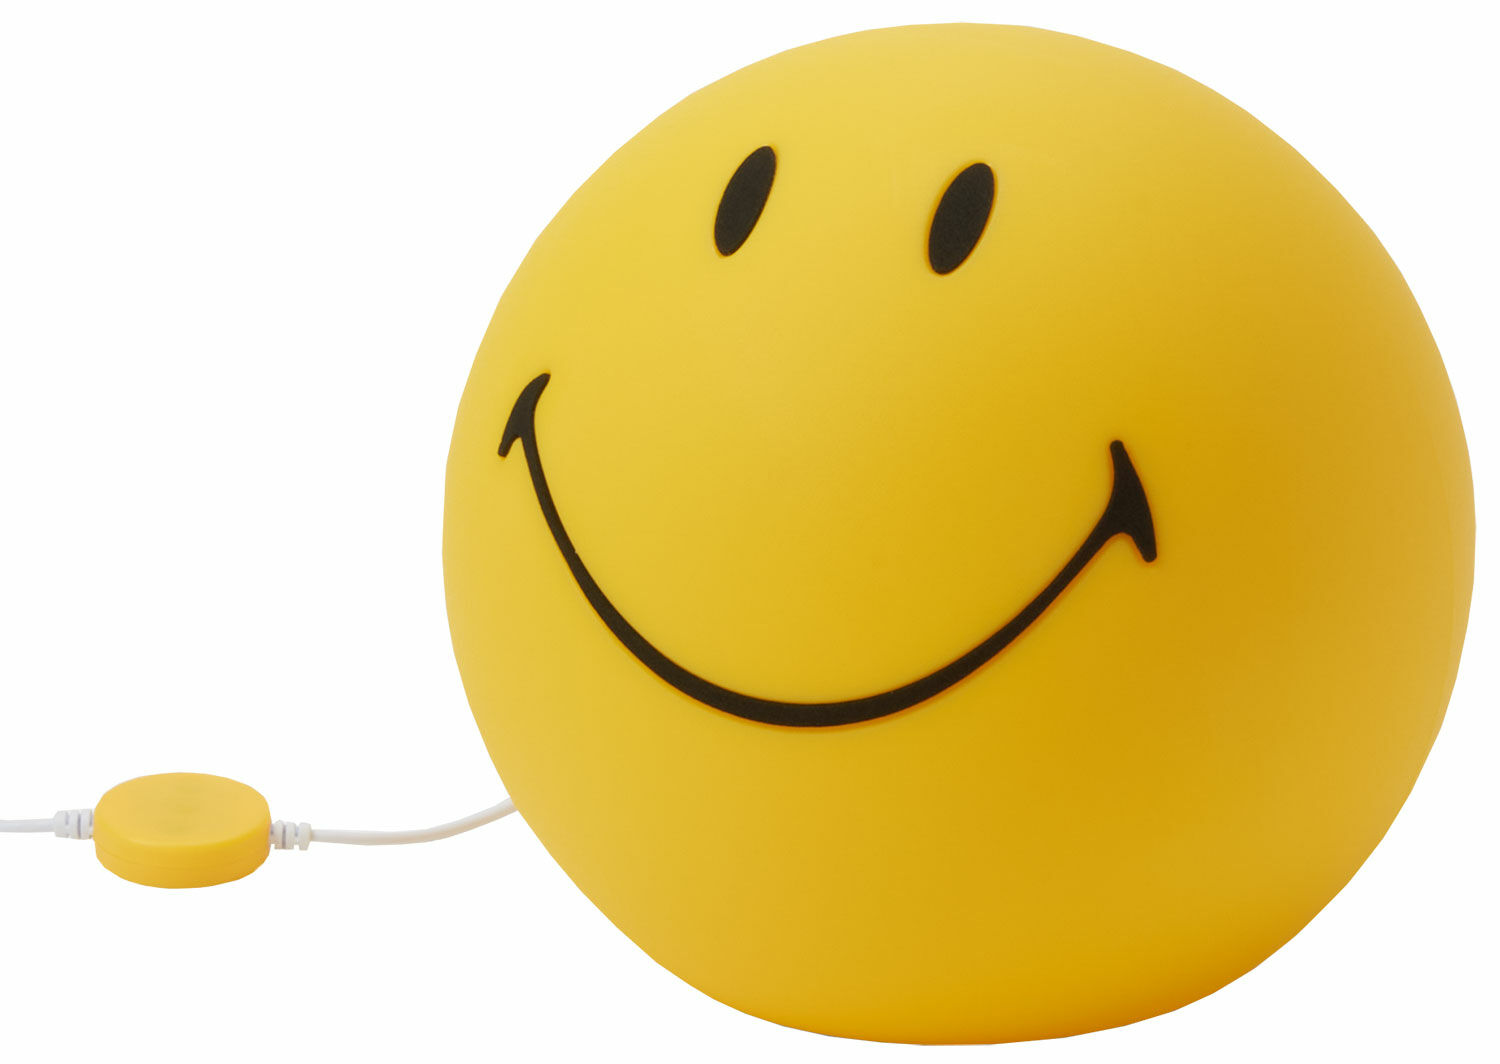 LED lamp "Smiley®", small version, dimmable incl. night mode by Mr. Maria